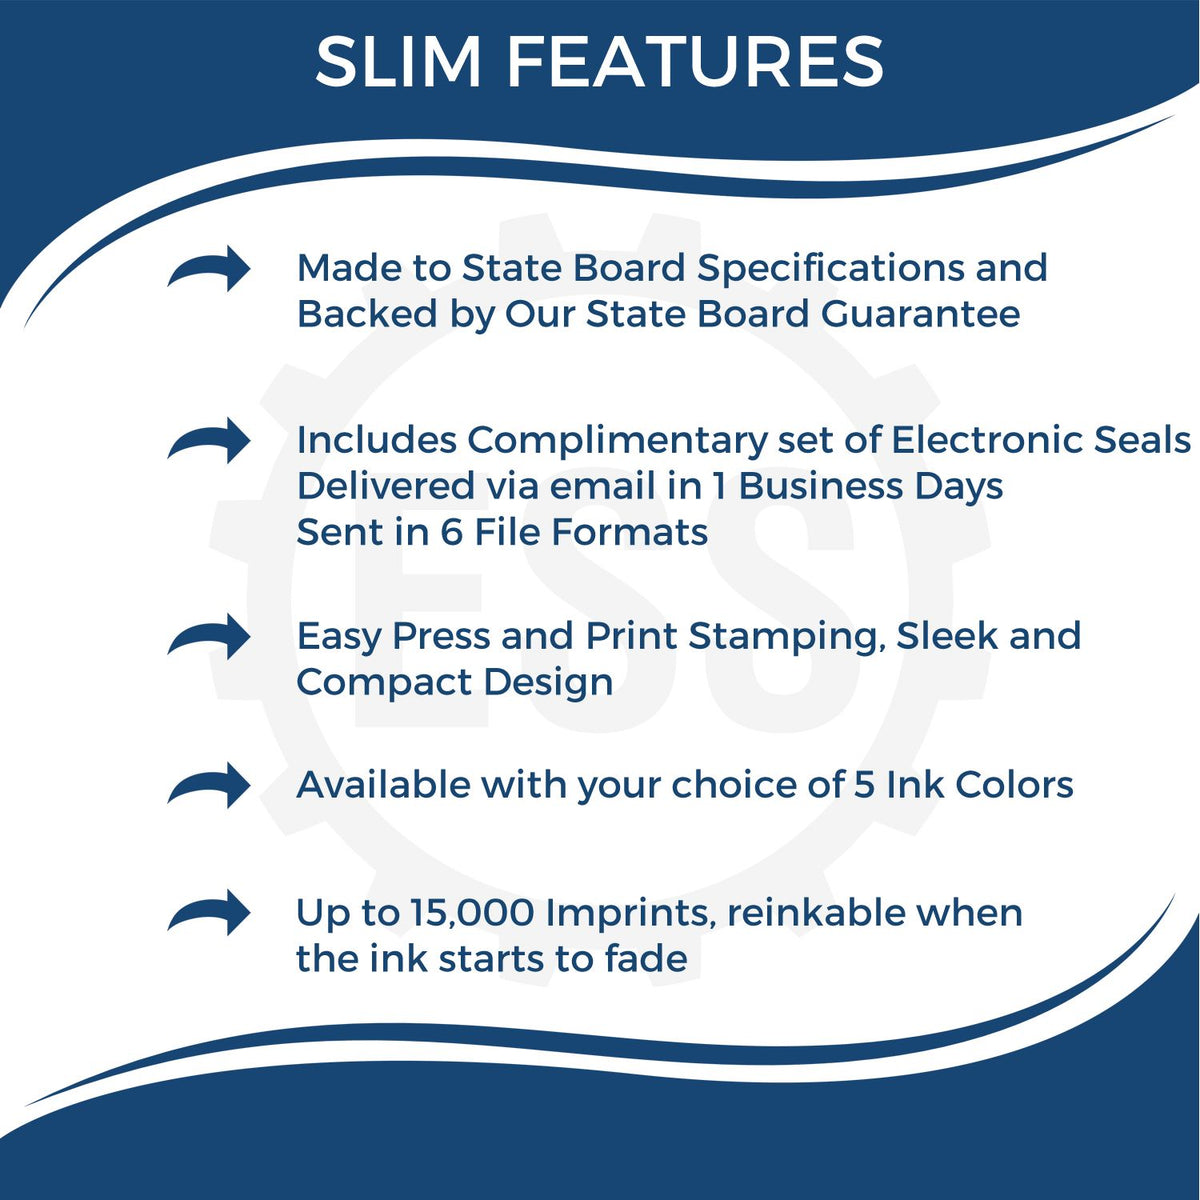 A picture of an infographic highlighting the selling points for the Super Slim Louisiana Notary Public Stamp